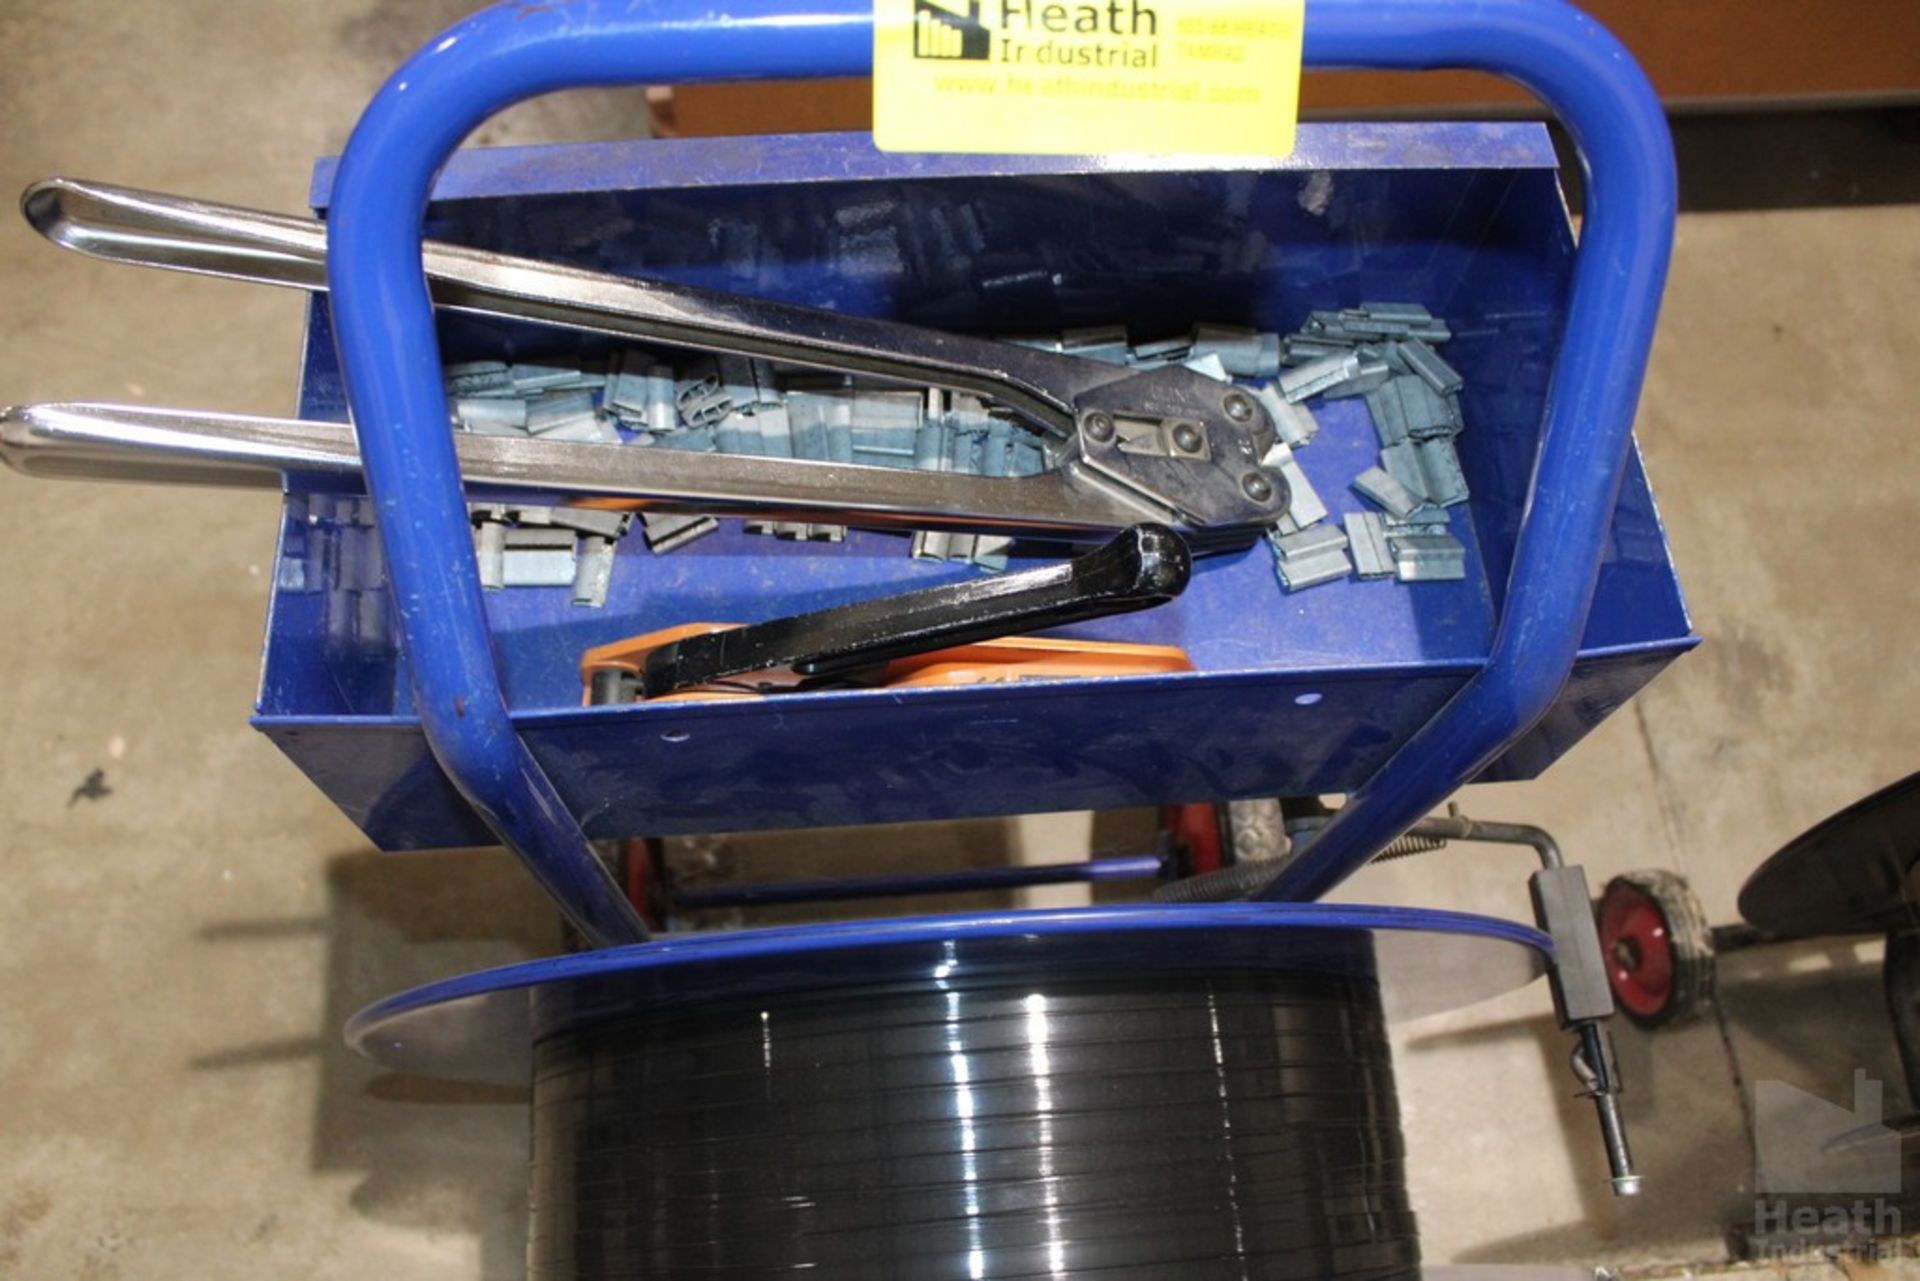 ULINE PORTABLE BANDING CART WITH TOOLS AND PLASTIC BANDING - Image 2 of 2